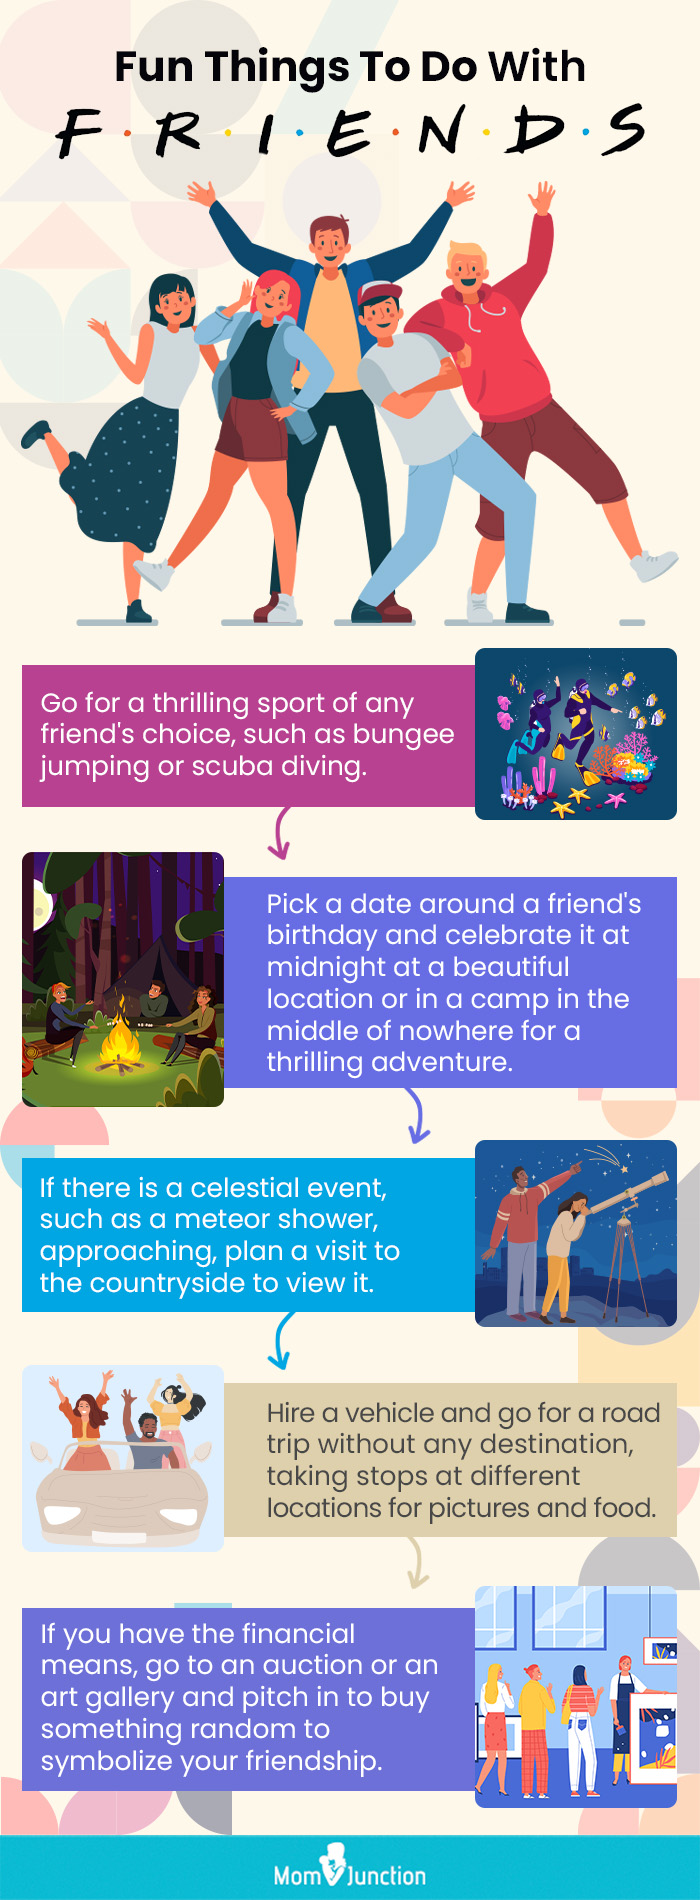 Fun things to do with friends (infographic)